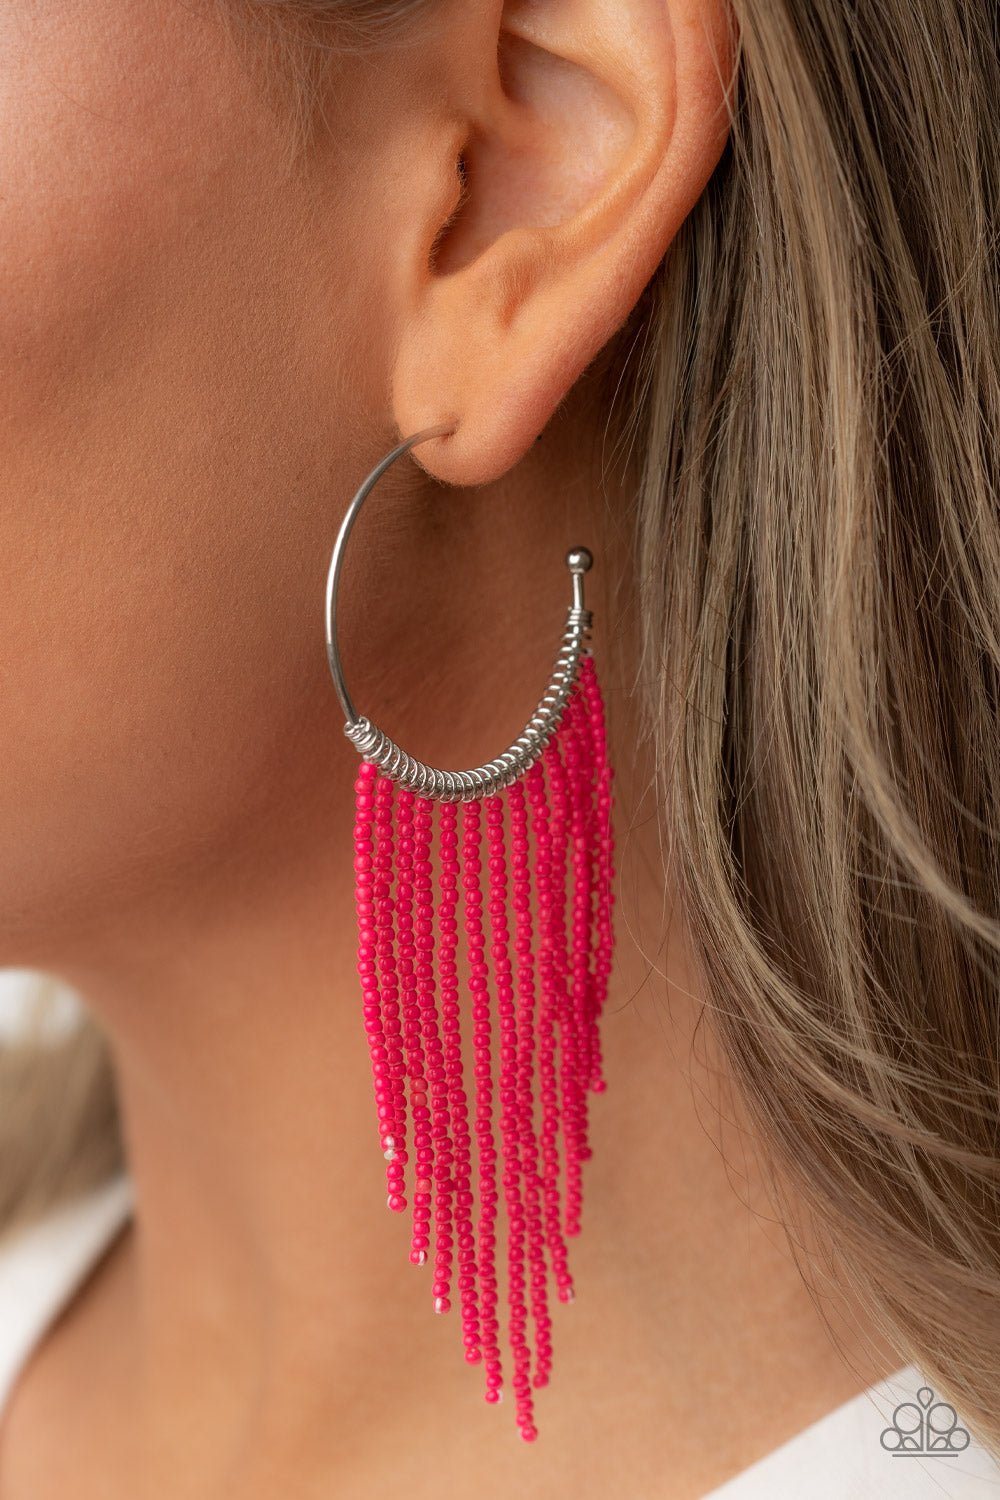 Paparazzi Accessories Saguaro Breeze - Pink Strands of dainty pink seed beads stream out from the bottom of a classic silver hoop, resulting in a flirtatiously tasseled look. Earring attaches to a standard post fitting. Hoop measures approximately 1 1/2"